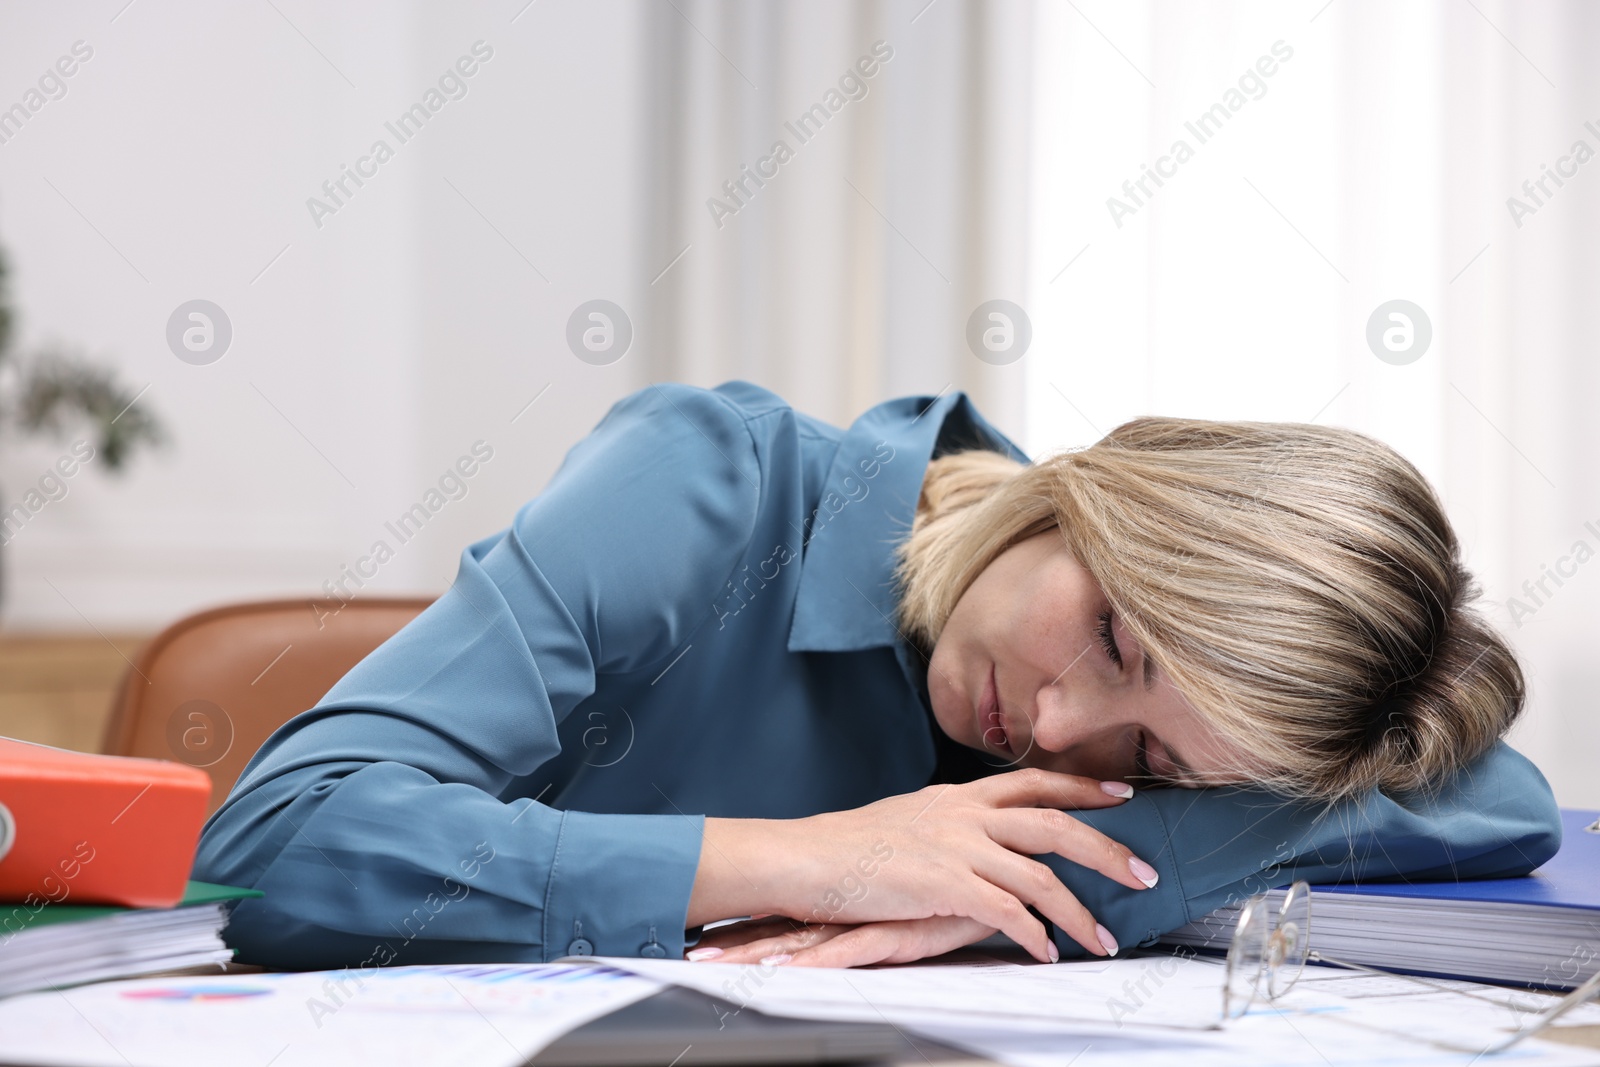 Photo of Office worker sleeping at workplace. Overwhelmed by work